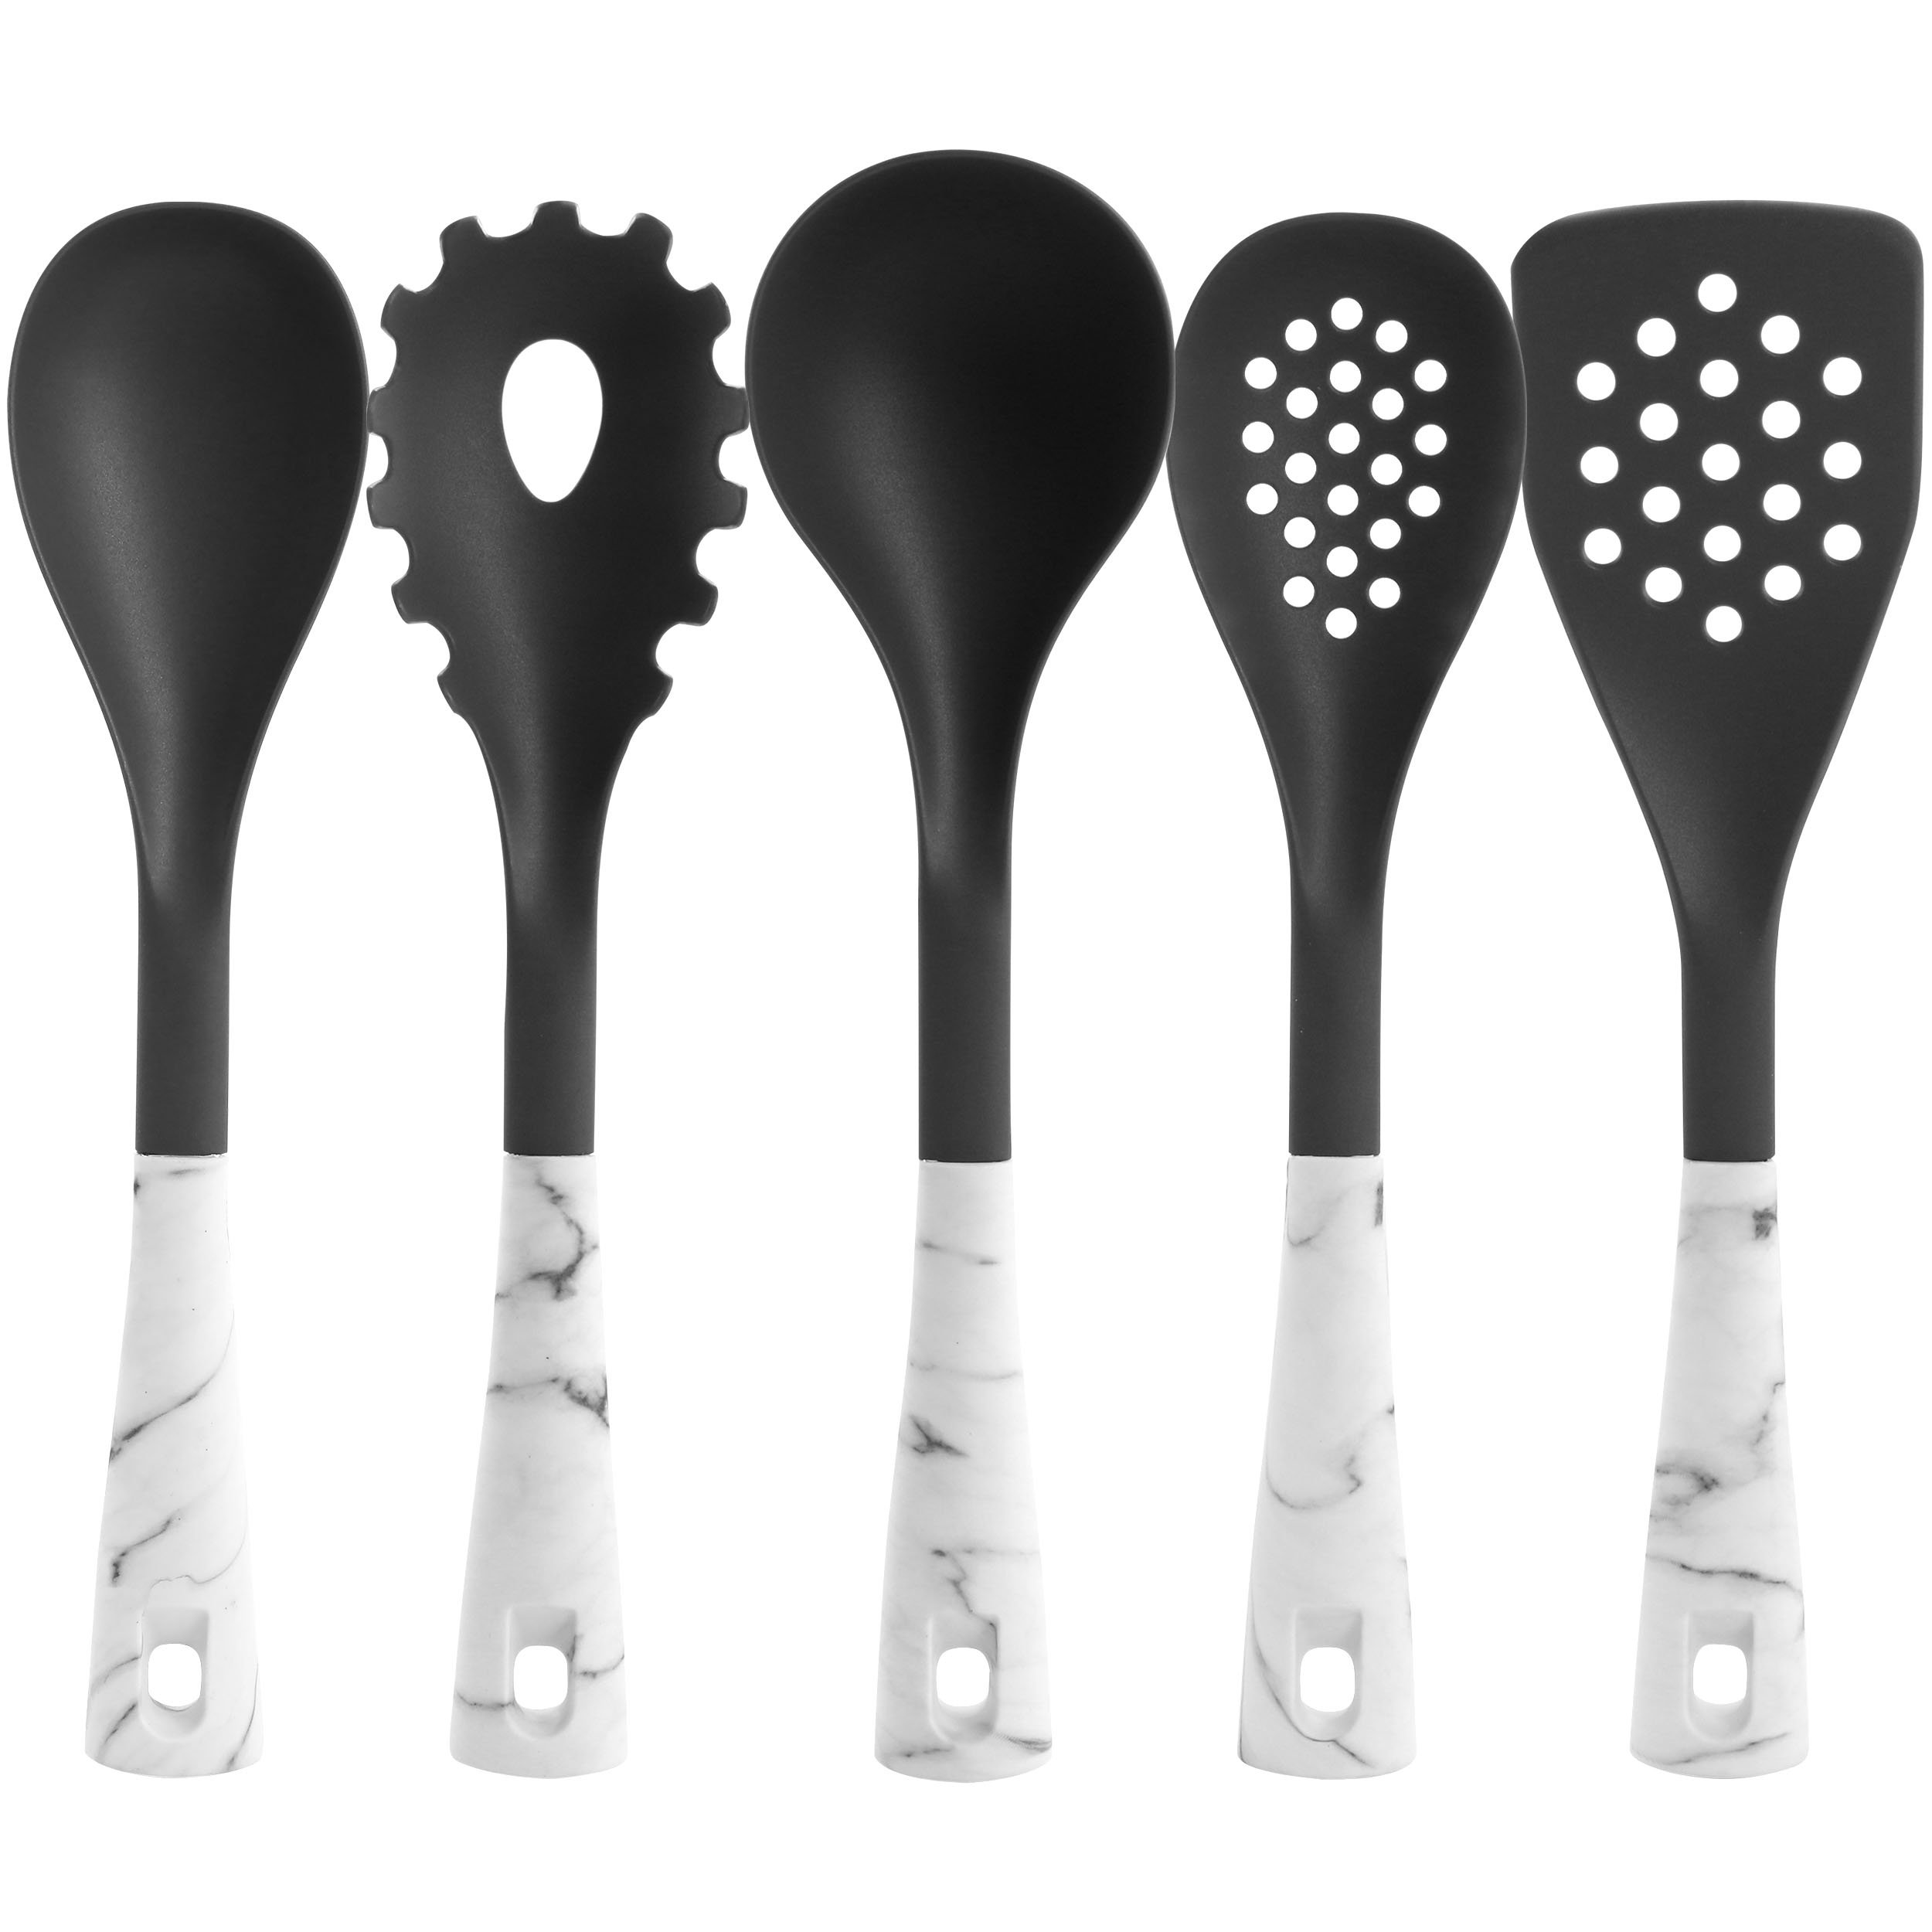 5pc Quality Plastic Kitchen Tool Cooking Utensil Slotted Spatula Spoon  Ladle Set